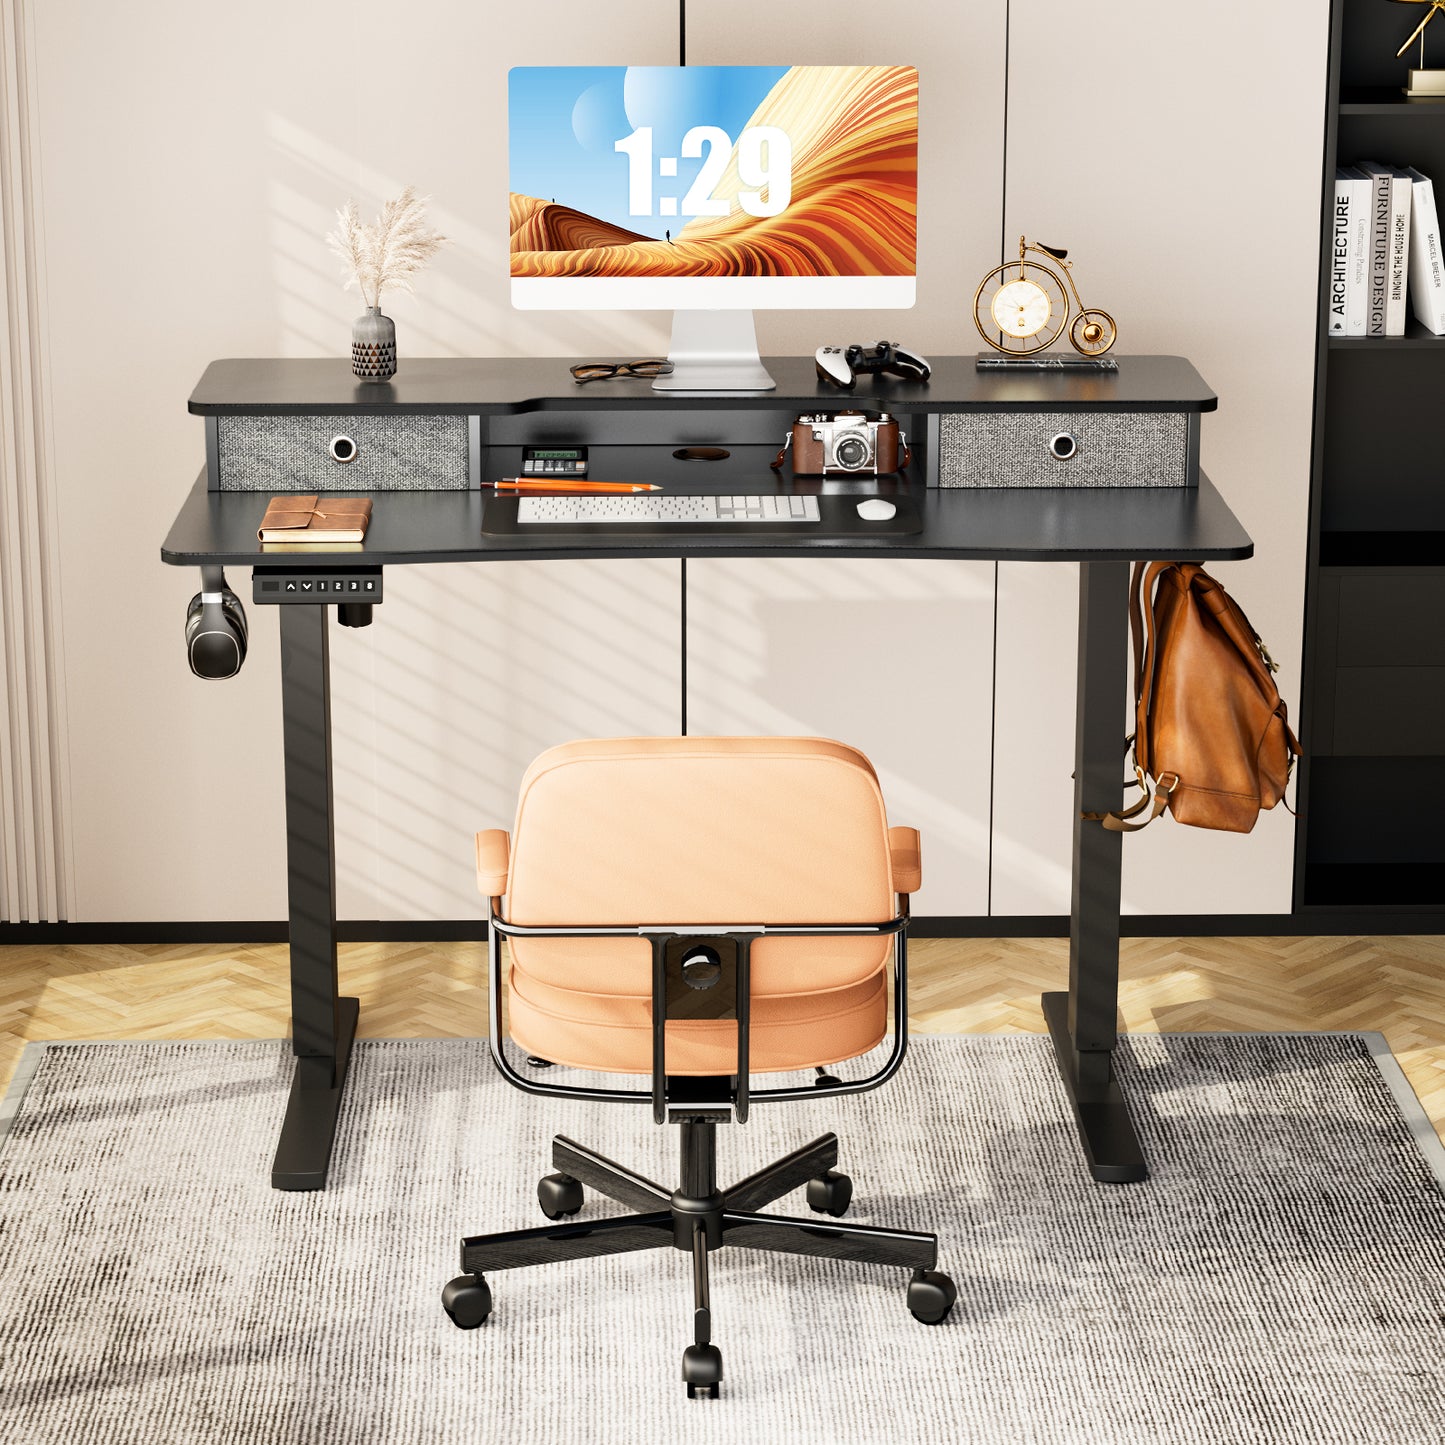 Height Adjustable Electric Standing Desk with Storage Shelf